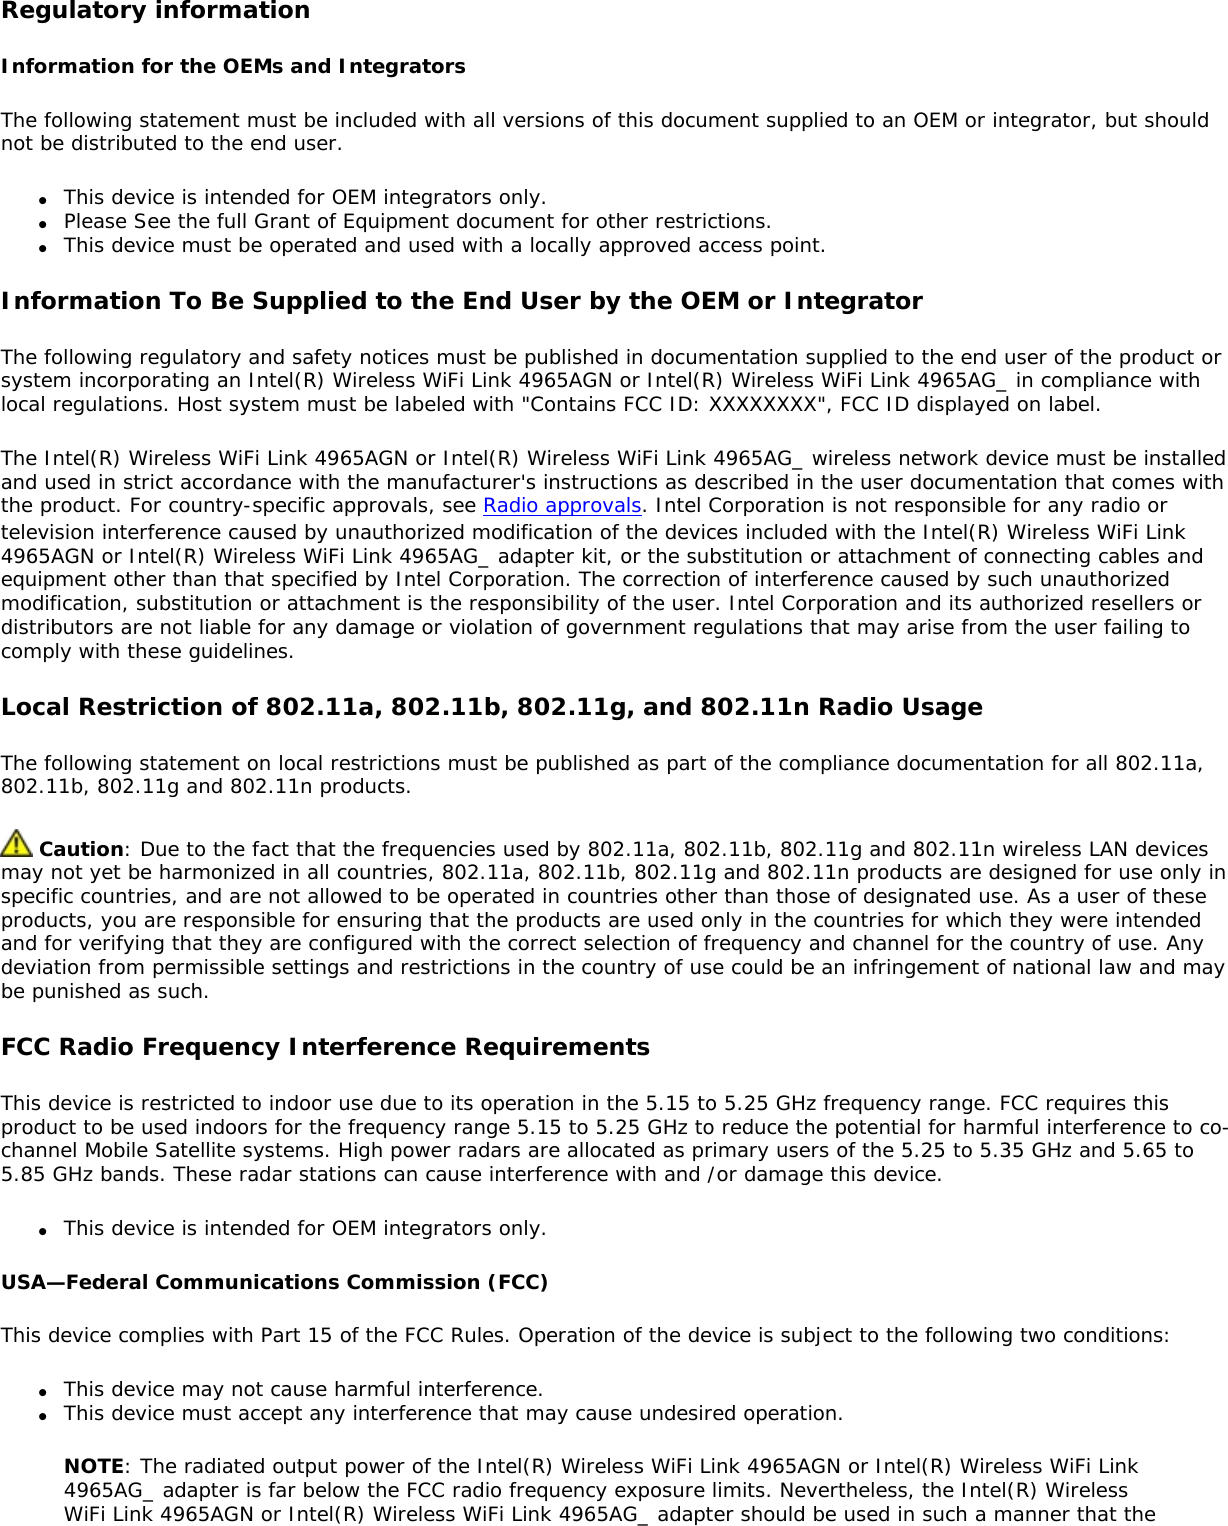 Regulatory informationInformation for the OEMs and IntegratorsThe following statement must be included with all versions of this document supplied to an OEM or integrator, but should not be distributed to the end user.●     This device is intended for OEM integrators only.●     Please See the full Grant of Equipment document for other restrictions.●     This device must be operated and used with a locally approved access point.Information To Be Supplied to the End User by the OEM or IntegratorThe following regulatory and safety notices must be published in documentation supplied to the end user of the product or system incorporating an Intel(R) Wireless WiFi Link 4965AGN or Intel(R) Wireless WiFi Link 4965AG_ in compliance with local regulations. Host system must be labeled with &quot;Contains FCC ID: XXXXXXXX&quot;, FCC ID displayed on label.The Intel(R) Wireless WiFi Link 4965AGN or Intel(R) Wireless WiFi Link 4965AG_ wireless network device must be installed and used in strict accordance with the manufacturer&apos;s instructions as described in the user documentation that comes with the product. For country-specific approvals, see Radio approvals. Intel Corporation is not responsible for any radio or television interference caused by unauthorized modification of the devices included with the Intel(R) Wireless WiFi Link 4965AGN or Intel(R) Wireless WiFi Link 4965AG_ adapter kit, or the substitution or attachment of connecting cables and equipment other than that specified by Intel Corporation. The correction of interference caused by such unauthorized modification, substitution or attachment is the responsibility of the user. Intel Corporation and its authorized resellers or distributors are not liable for any damage or violation of government regulations that may arise from the user failing to comply with these guidelines.Local Restriction of 802.11a, 802.11b, 802.11g, and 802.11n Radio UsageThe following statement on local restrictions must be published as part of the compliance documentation for all 802.11a, 802.11b, 802.11g and 802.11n products. Caution: Due to the fact that the frequencies used by 802.11a, 802.11b, 802.11g and 802.11n wireless LAN devices may not yet be harmonized in all countries, 802.11a, 802.11b, 802.11g and 802.11n products are designed for use only in specific countries, and are not allowed to be operated in countries other than those of designated use. As a user of these products, you are responsible for ensuring that the products are used only in the countries for which they were intended and for verifying that they are configured with the correct selection of frequency and channel for the country of use. Any deviation from permissible settings and restrictions in the country of use could be an infringement of national law and may be punished as such.FCC Radio Frequency Interference RequirementsThis device is restricted to indoor use due to its operation in the 5.15 to 5.25 GHz frequency range. FCC requires this product to be used indoors for the frequency range 5.15 to 5.25 GHz to reduce the potential for harmful interference to co-channel Mobile Satellite systems. High power radars are allocated as primary users of the 5.25 to 5.35 GHz and 5.65 to 5.85 GHz bands. These radar stations can cause interference with and /or damage this device.●     This device is intended for OEM integrators only.USA—Federal Communications Commission (FCC)This device complies with Part 15 of the FCC Rules. Operation of the device is subject to the following two conditions:●     This device may not cause harmful interference.●     This device must accept any interference that may cause undesired operation.NOTE: The radiated output power of the Intel(R) Wireless WiFi Link 4965AGN or Intel(R) Wireless WiFi Link 4965AG_ adapter is far below the FCC radio frequency exposure limits. Nevertheless, the Intel(R) Wireless WiFi Link 4965AGN or Intel(R) Wireless WiFi Link 4965AG_ adapter should be used in such a manner that the 